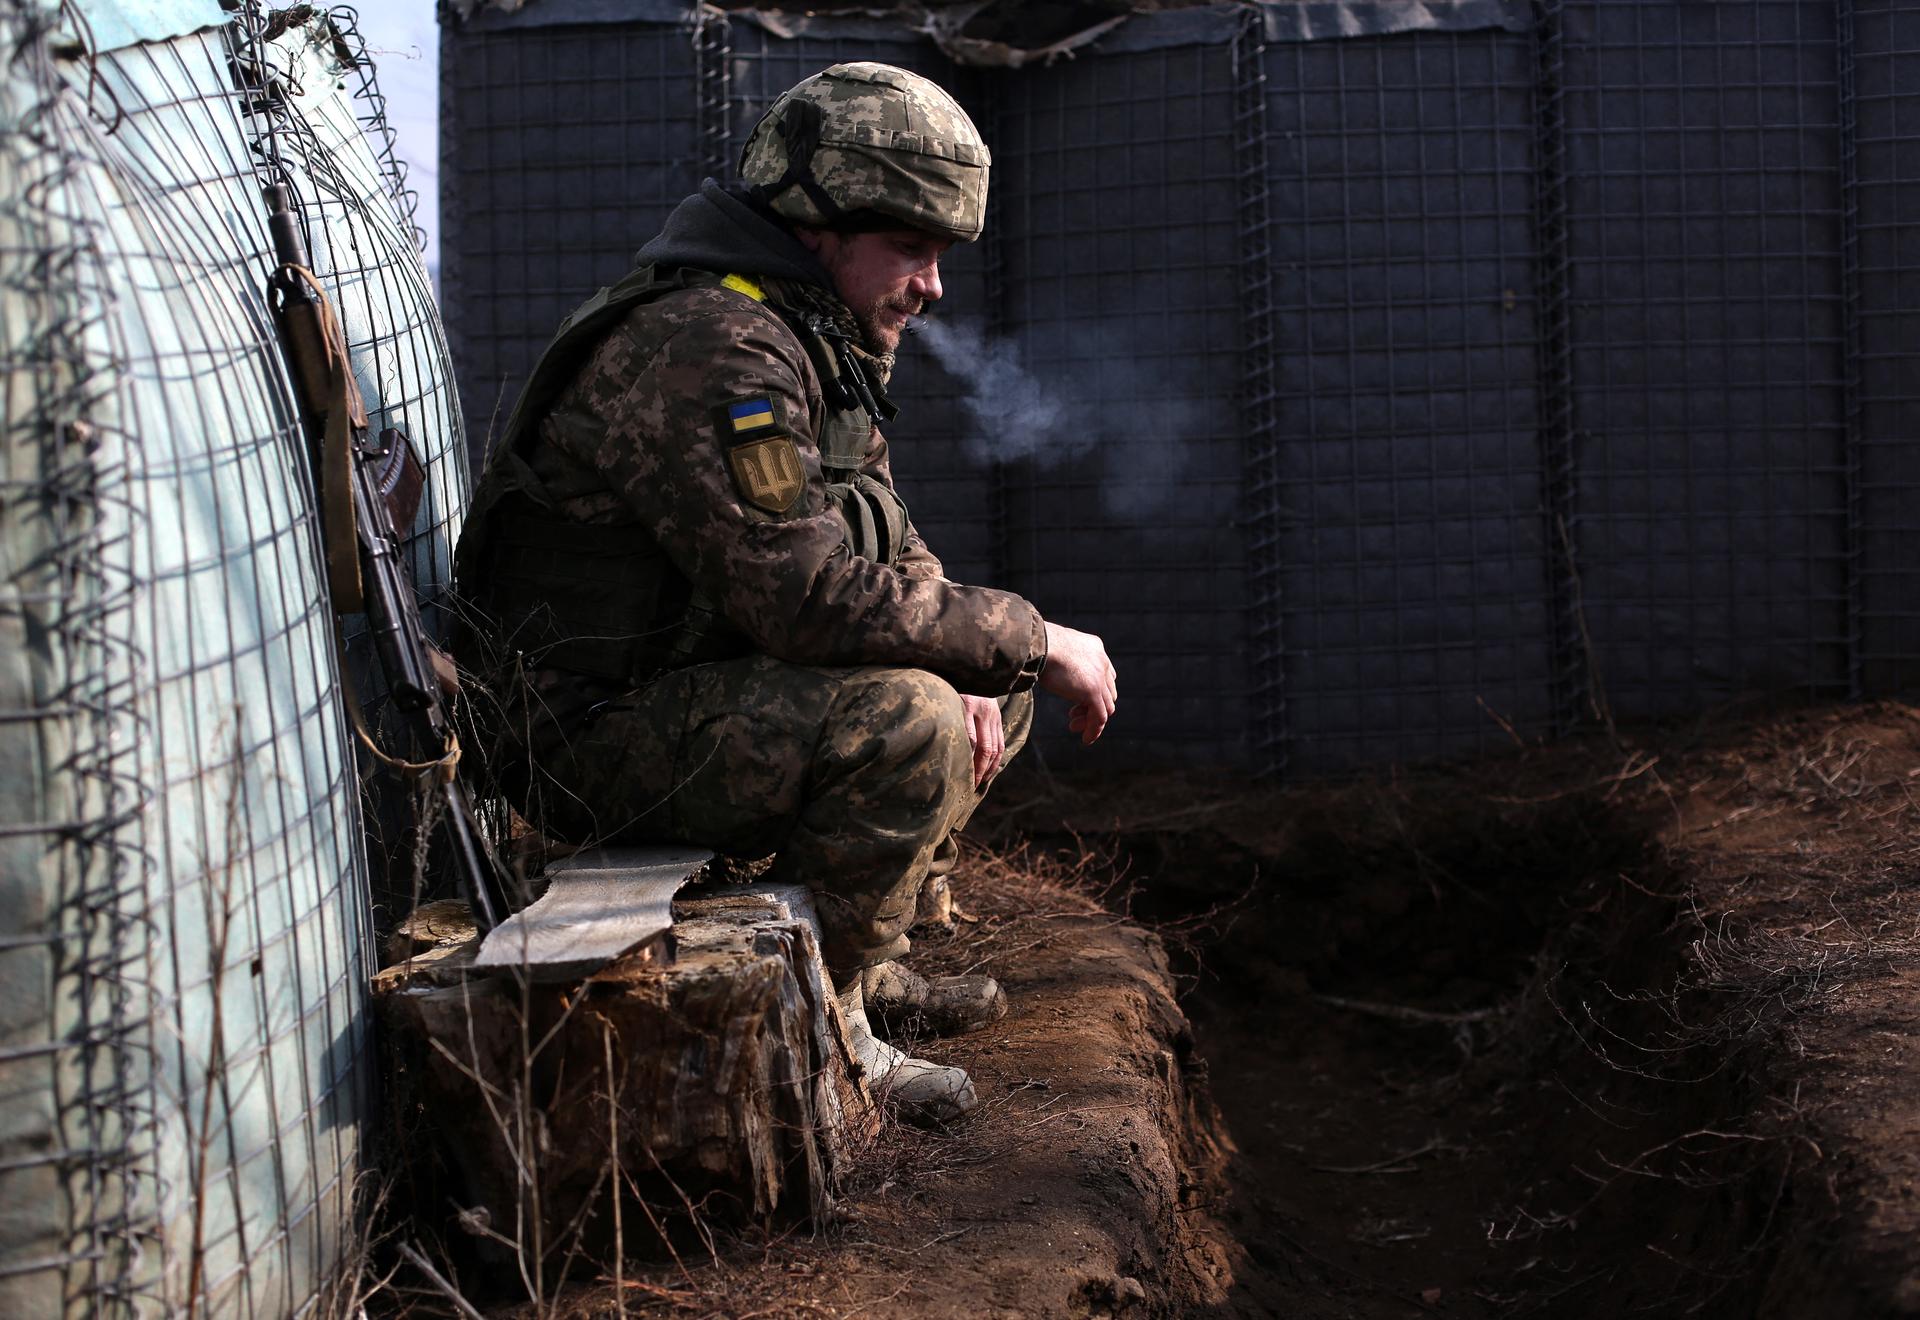 A Ukrainian soldier smokes a cigarette near the front line with Russia-backed separatists in Lugansk, Ukraine, on Feb. 22, 2022.